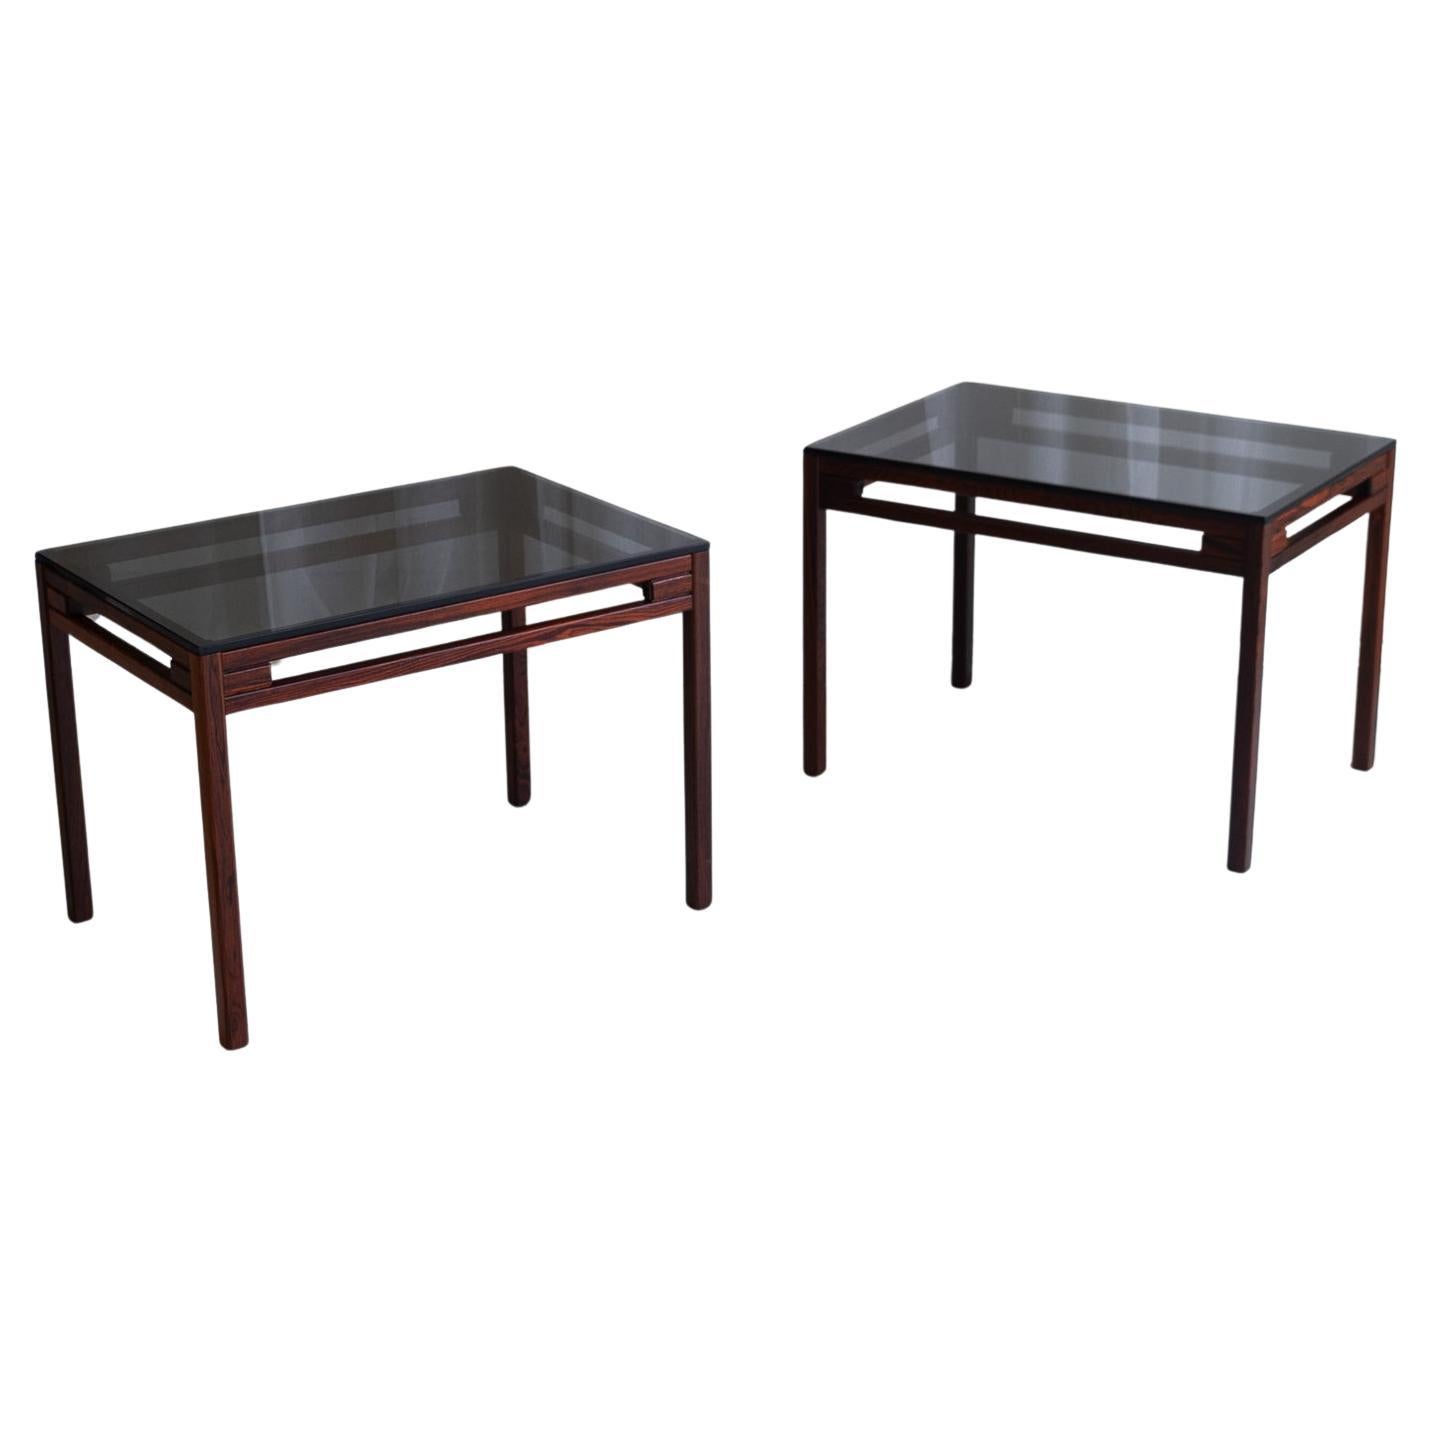 Danish Modern Side Tables in Rosewood and Glass, 1960s. Set of 2.